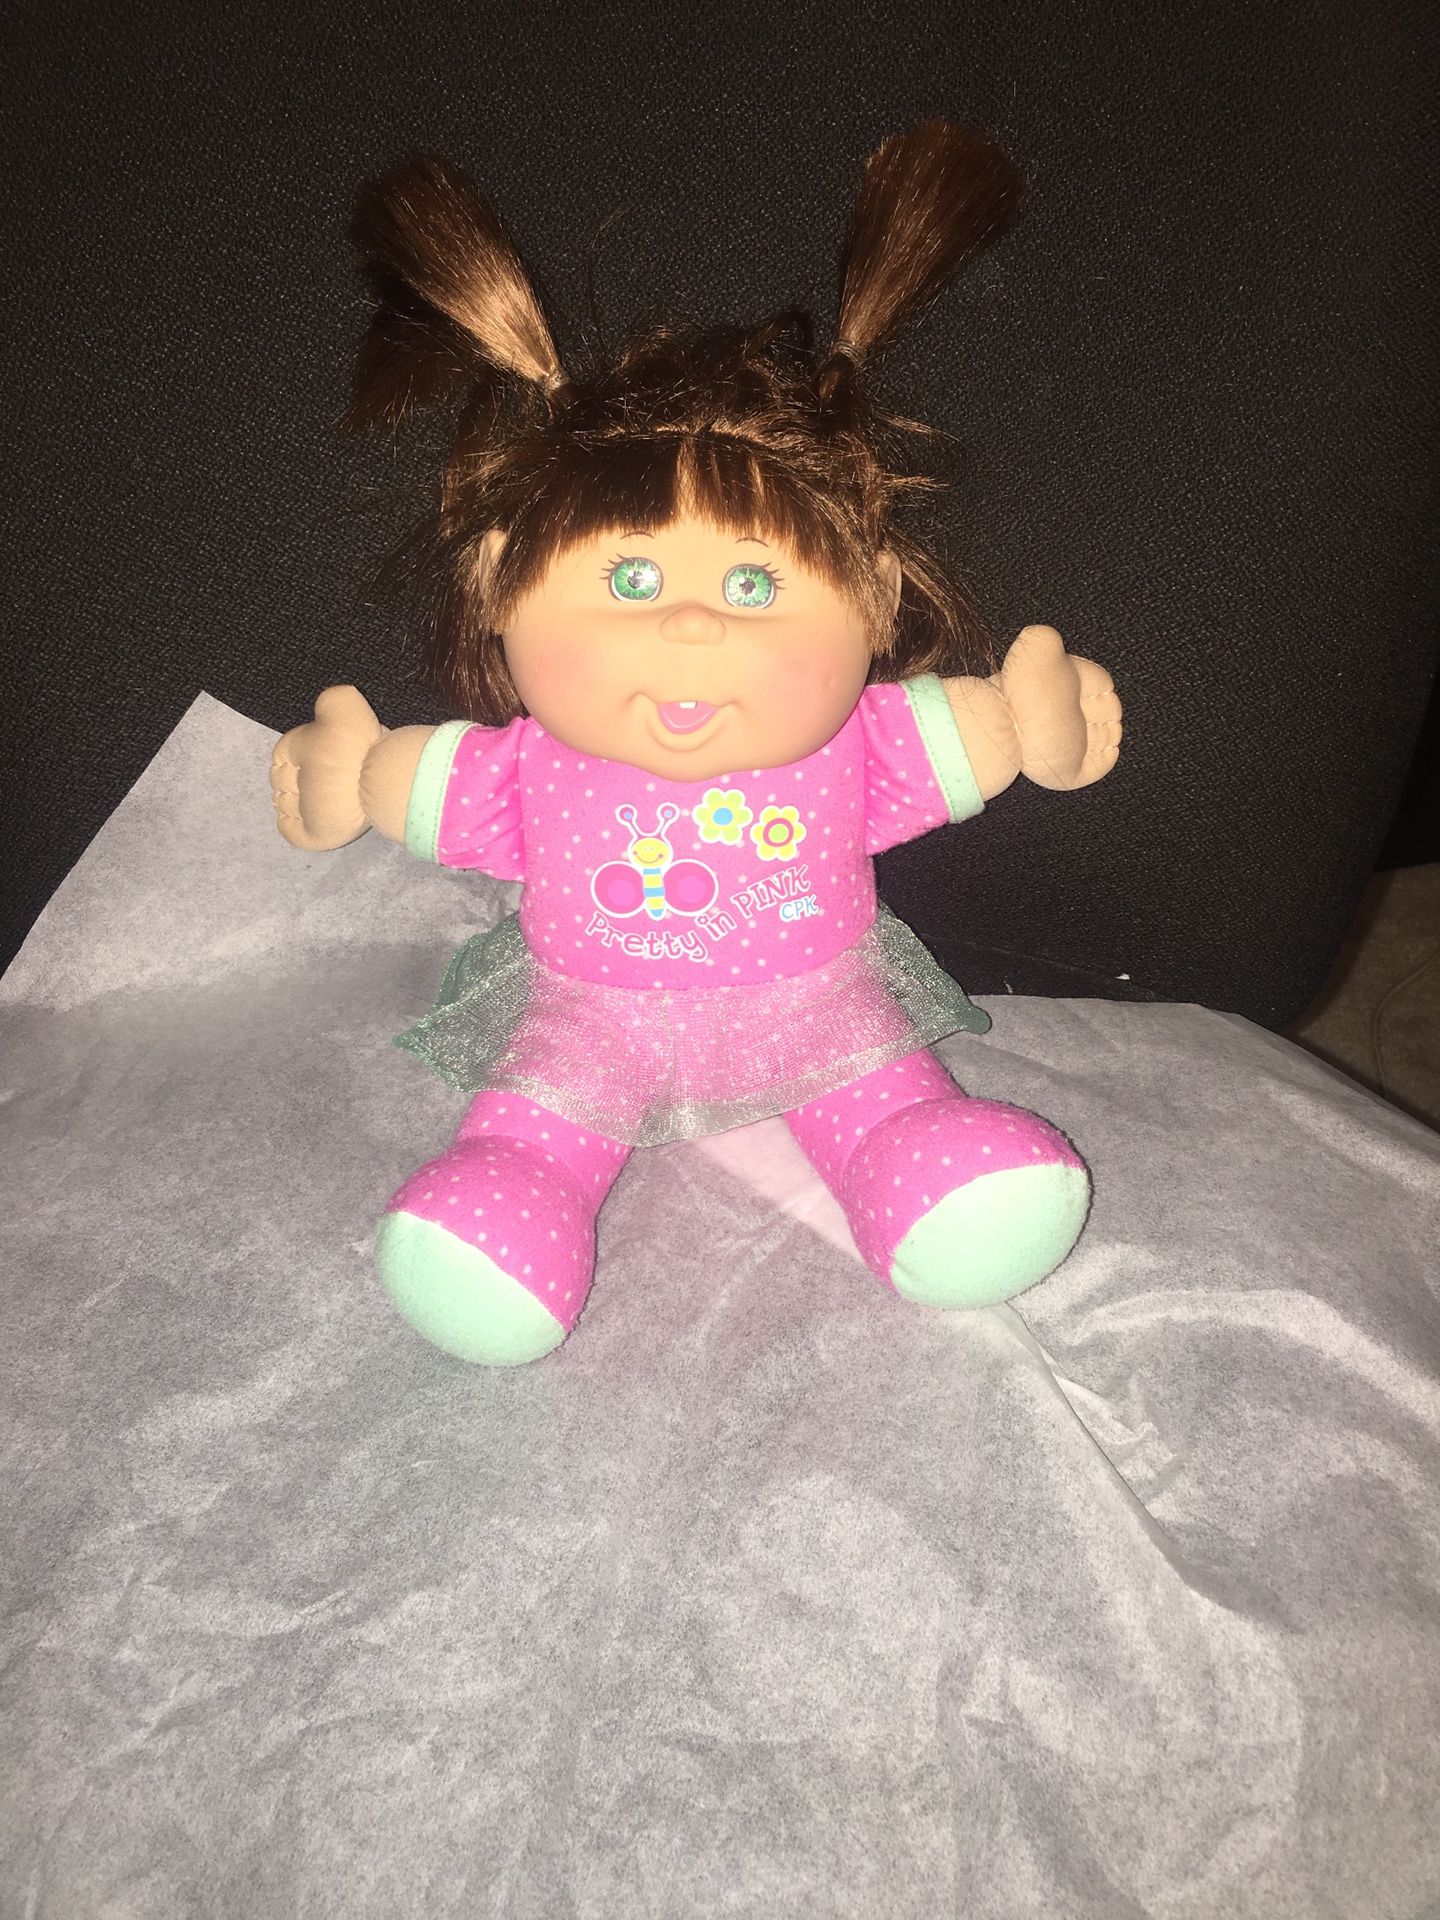 Cabbage Patch kids “ Pretty in Pink “ 11” tall doll